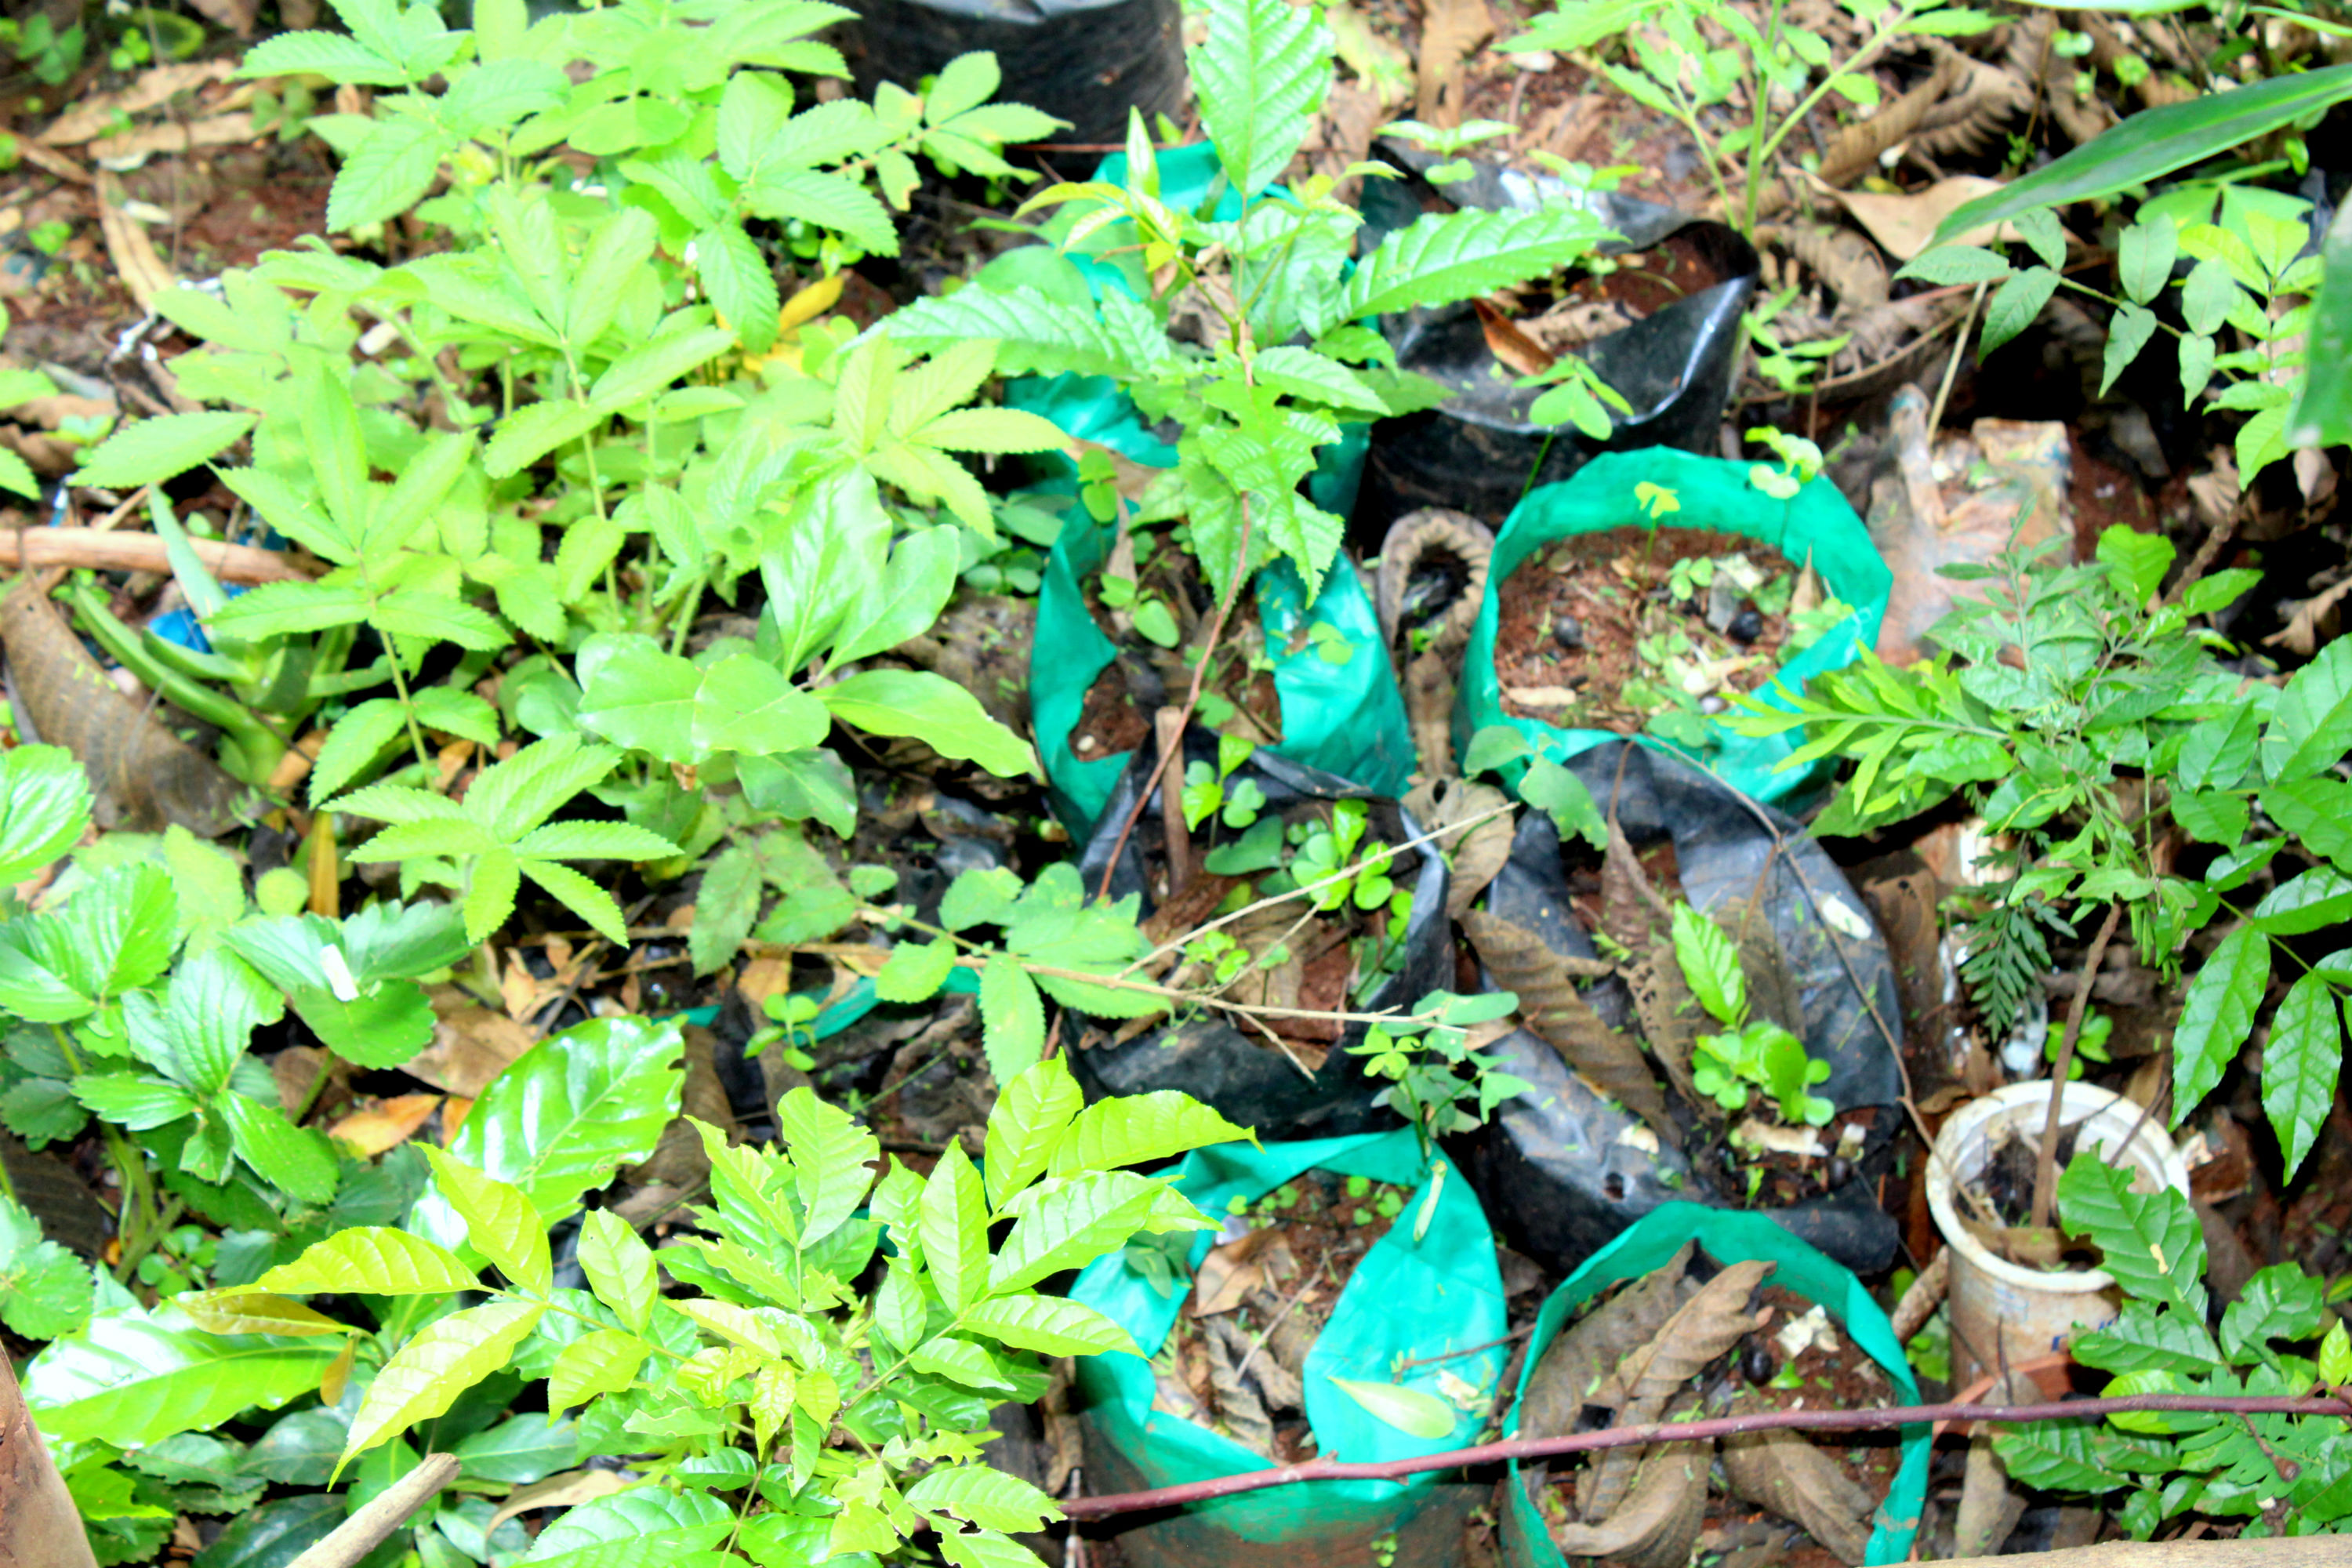 Seedlings in plastic bags, which have been banned by the Ministry of Environment and Natural Resources in Kenya. According to Kinyanjui, the plastic bags squeeze the roots of the seedlings, preventing them from growing naturally.
